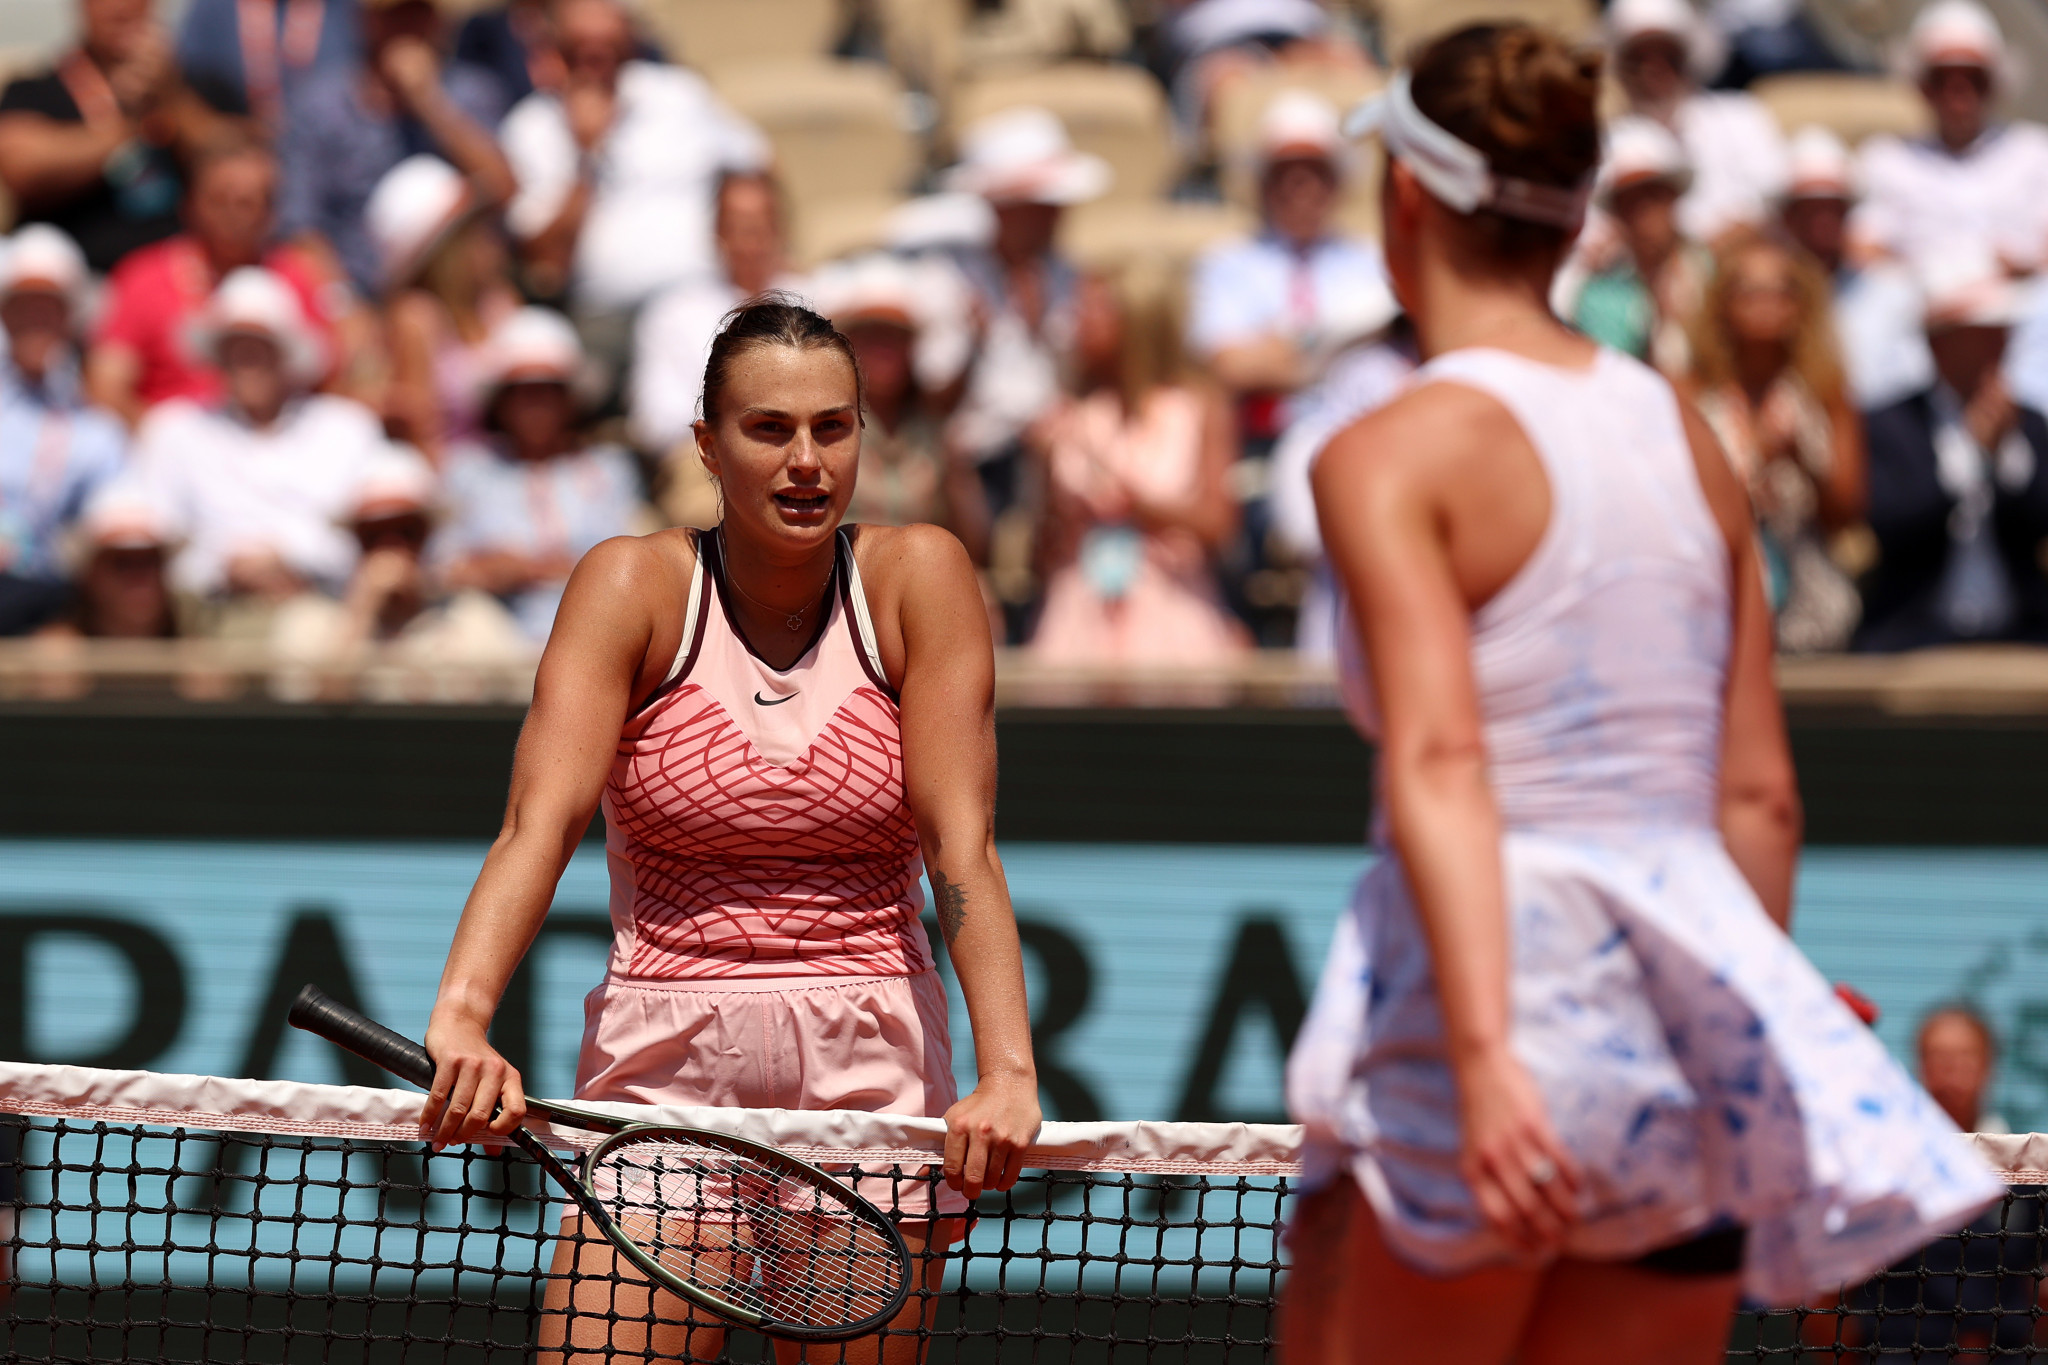 Elina Svitolina, refused to shake hands with Aryna Sabalenka, pictured standing at the net, following their French Open quarter-final in Paris ©Getty Images